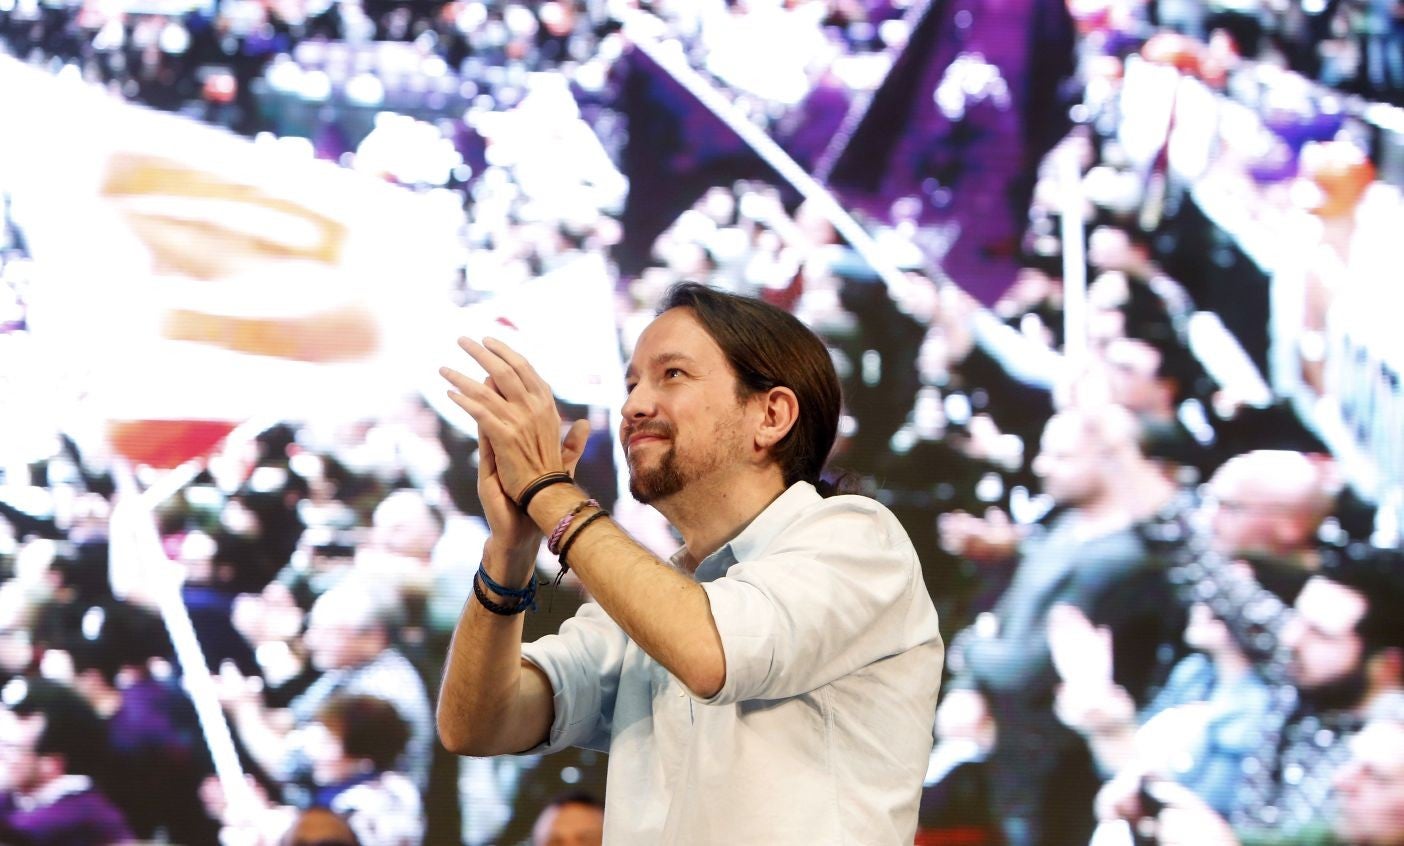 Pablo Iglesias, leader of Podemos party, applauds during a closing campaign rally in Valencia, Spain